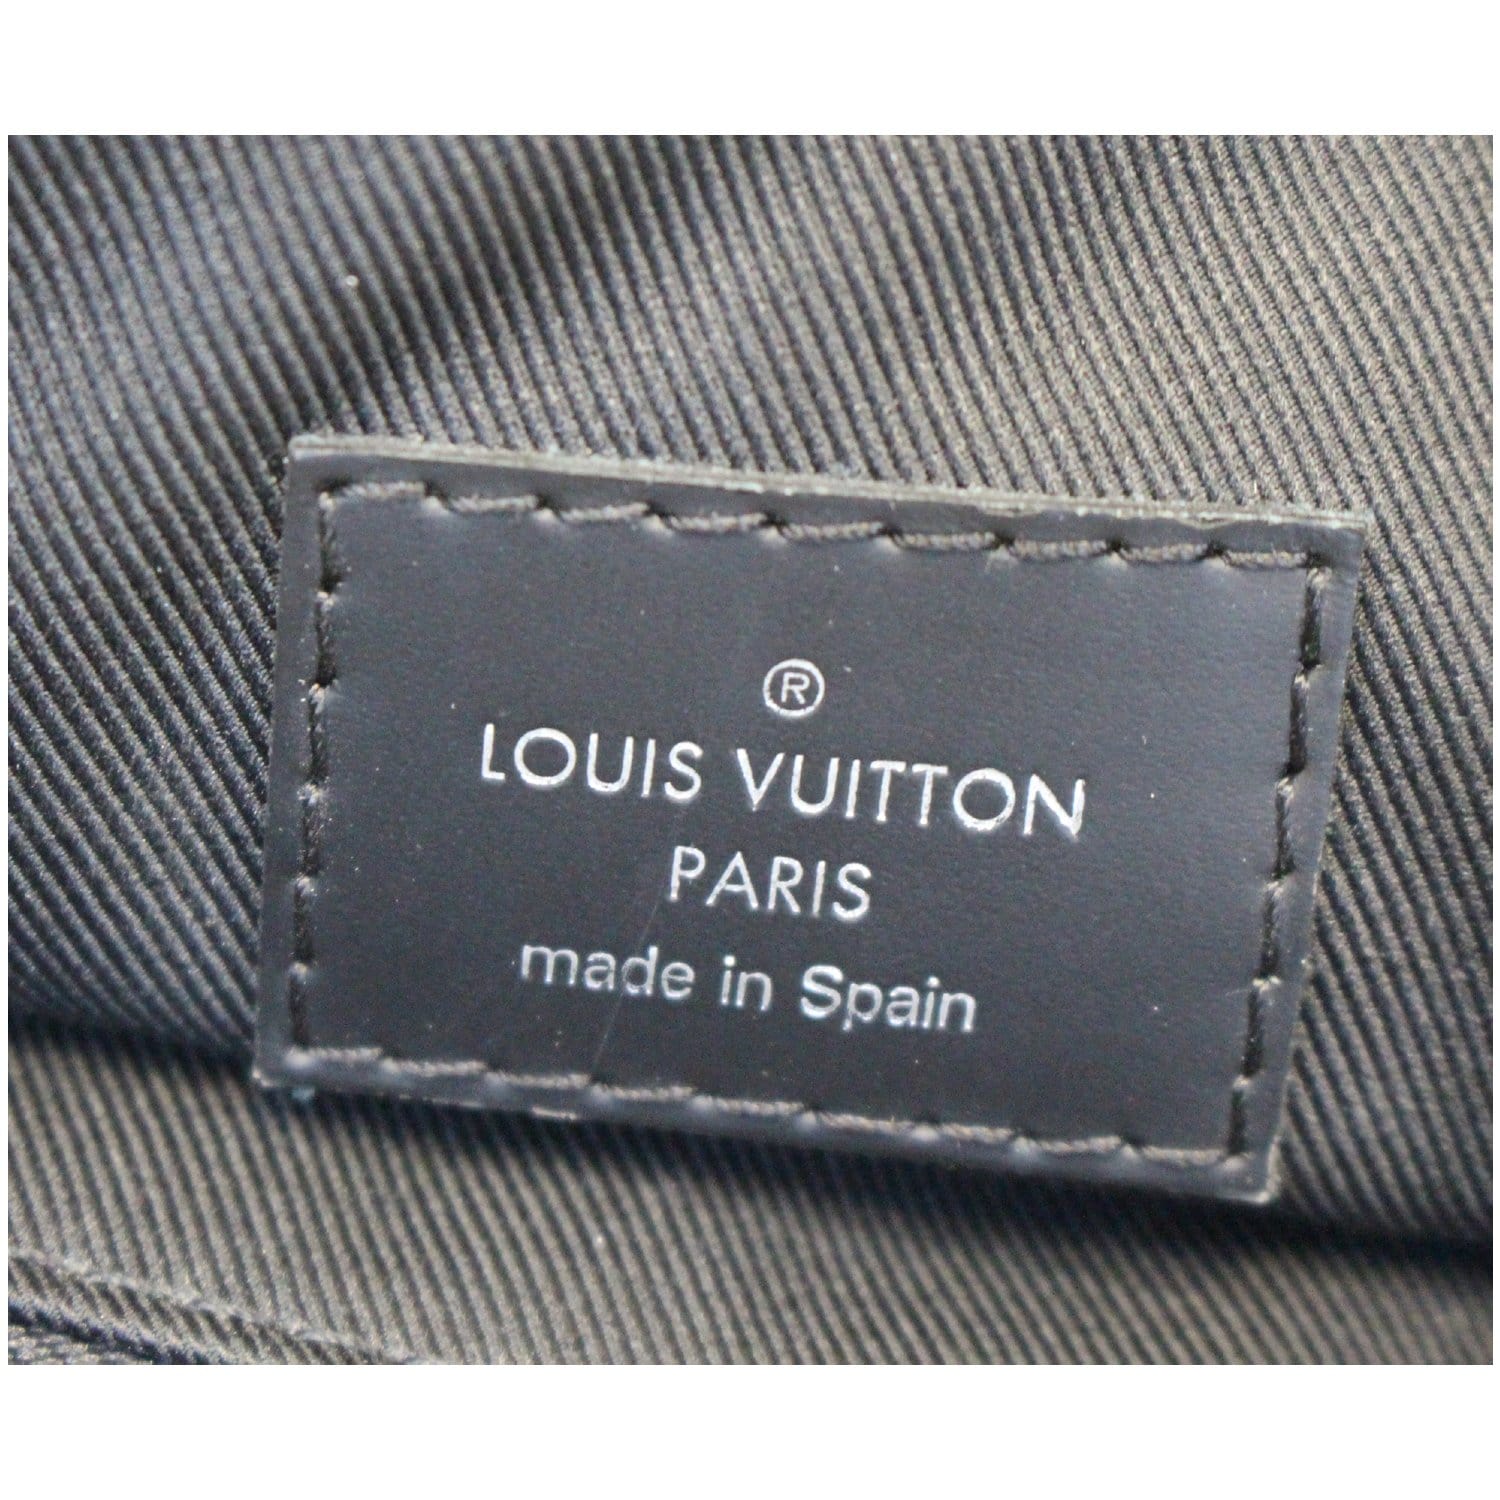 Ovrnundr on Instagram: New Louis Vuitton “Waterfront Top” slide with the  monogram pattern engraved on the front straps. Photo: @del.ten